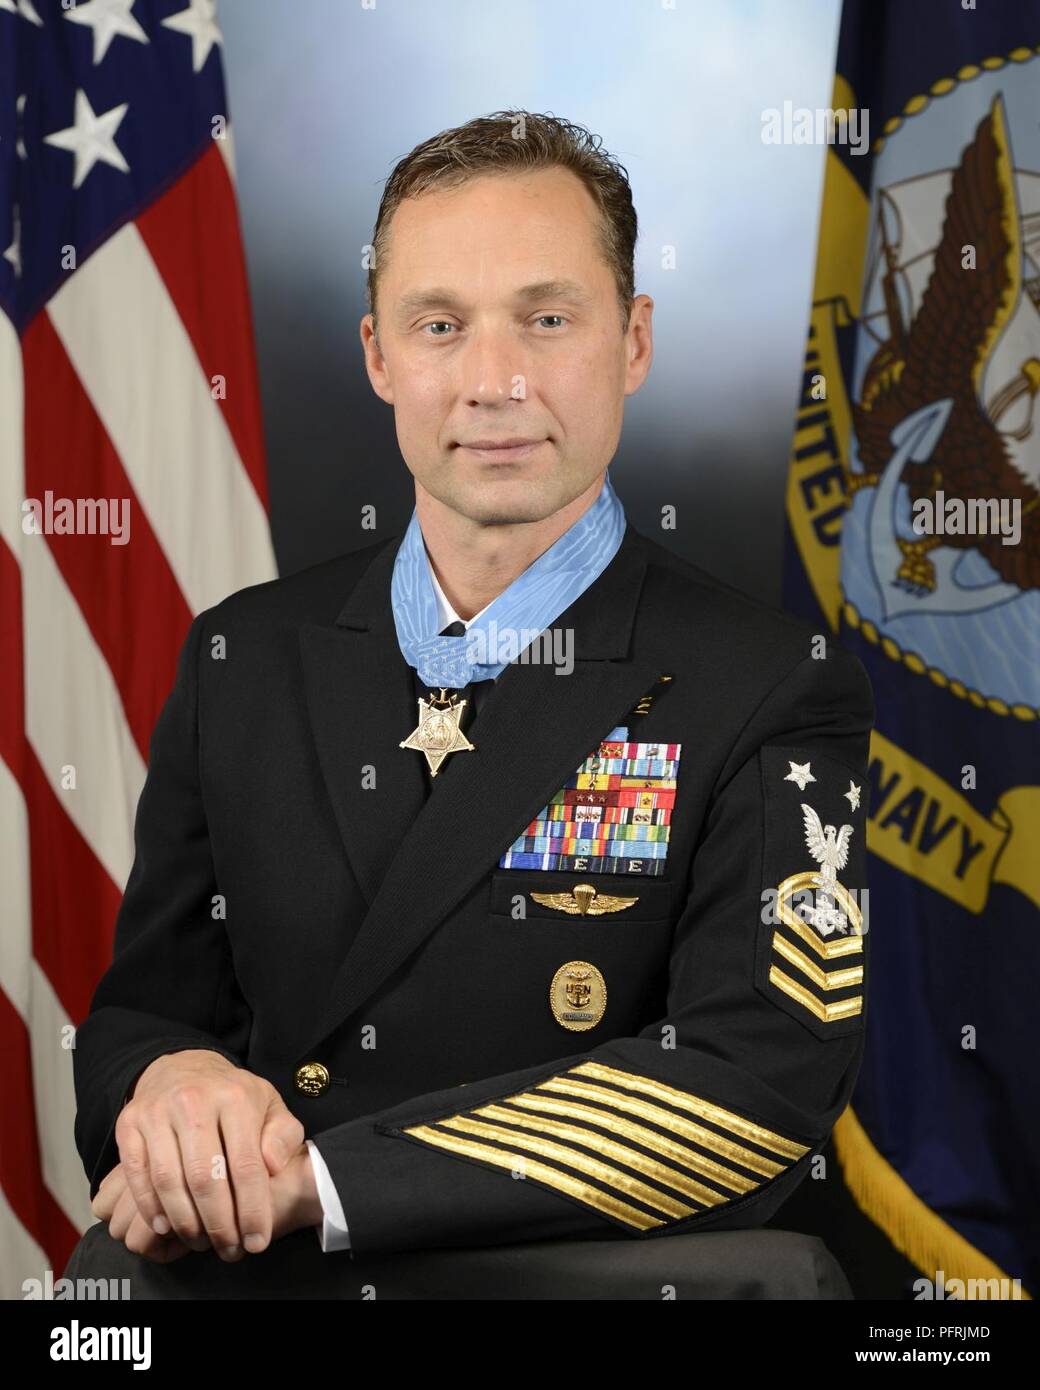 180525-A-SS368-007 WASHINGTON (May 25, 2018) An official portrait of retired Master Chief Special Warfare Operator (SEAL) Britt K. Slabinski taken May 25, 2018 at the Pentagon. President Donald J. Trump awarded the Medal of Honor to Slabinski during a White House ceremony May 24, 2018 for his heroic actions during the Battle of Takur Ghar in March 2002 while serving in Afghanistan. Slabinski is being recognized for his actions while leading a team under heavy effective enemy fire in an attempt to rescue SEAL teammate Petty Officer 1st Class Neil Roberts during Operation Anaconda in 2002. The M Stock Photo